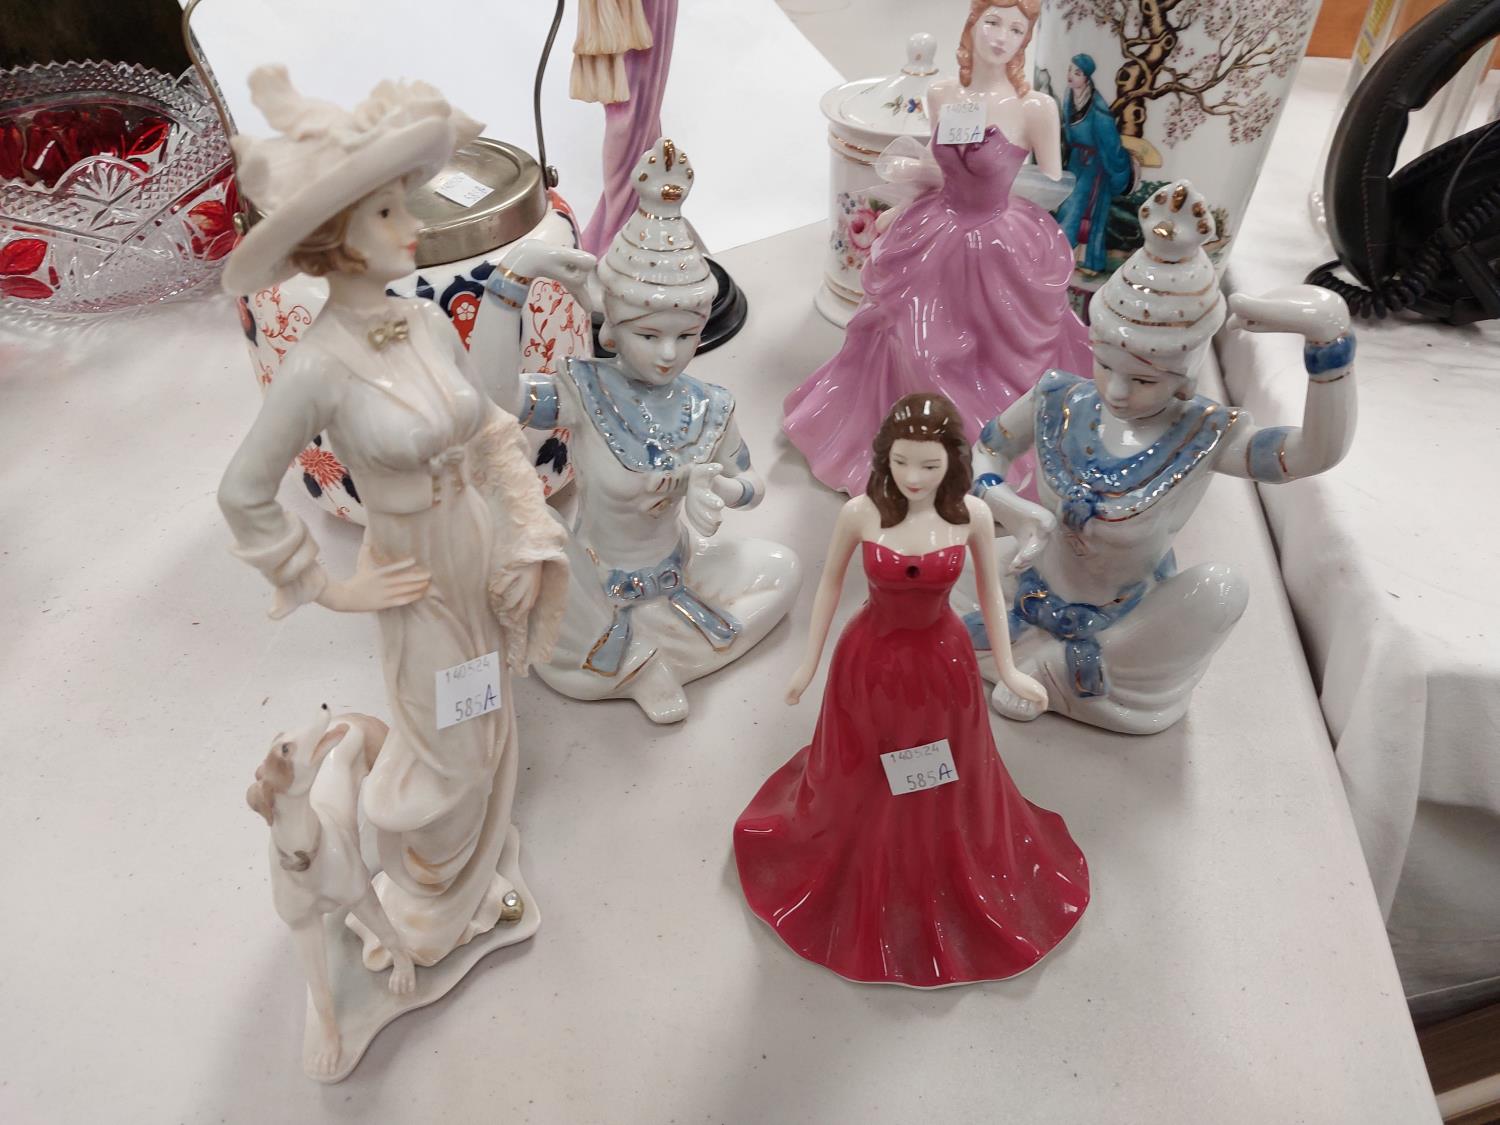 Two Royal Doulton figures "January" and "Victoria" (arm a.f); other figures and decorative pottery - Image 2 of 2